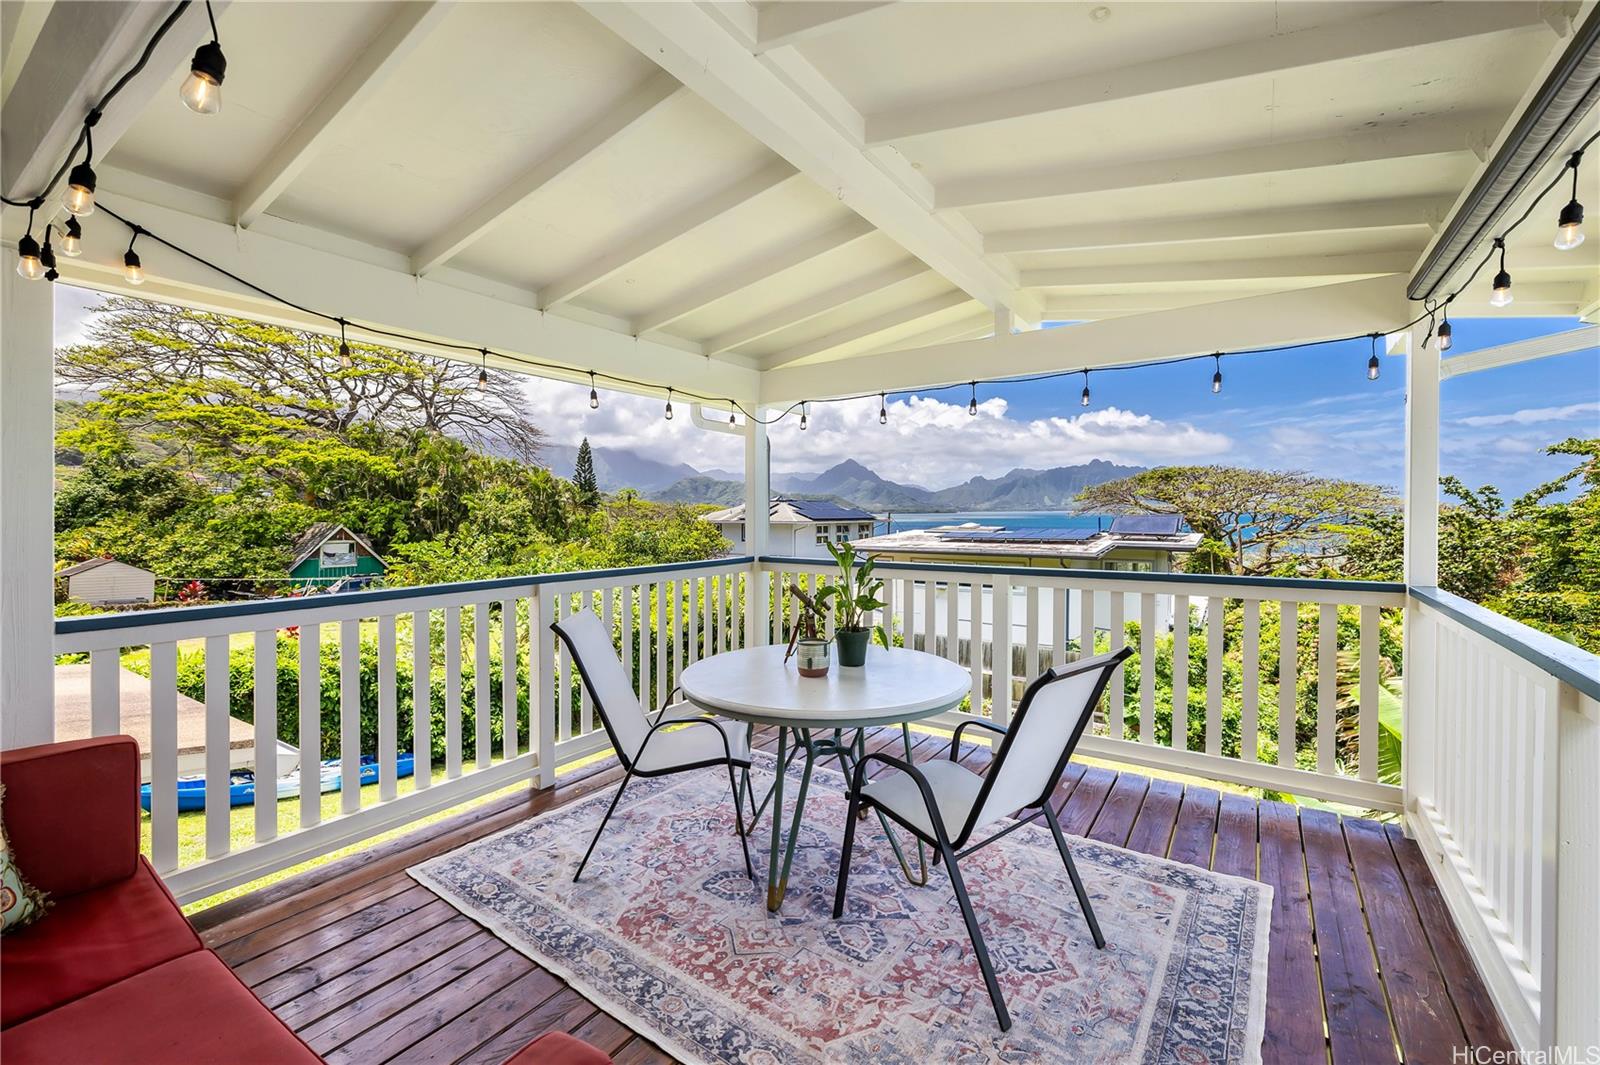 Enjoy your favorite beverage and meals every day on this wonderful covered deck with abundant views.